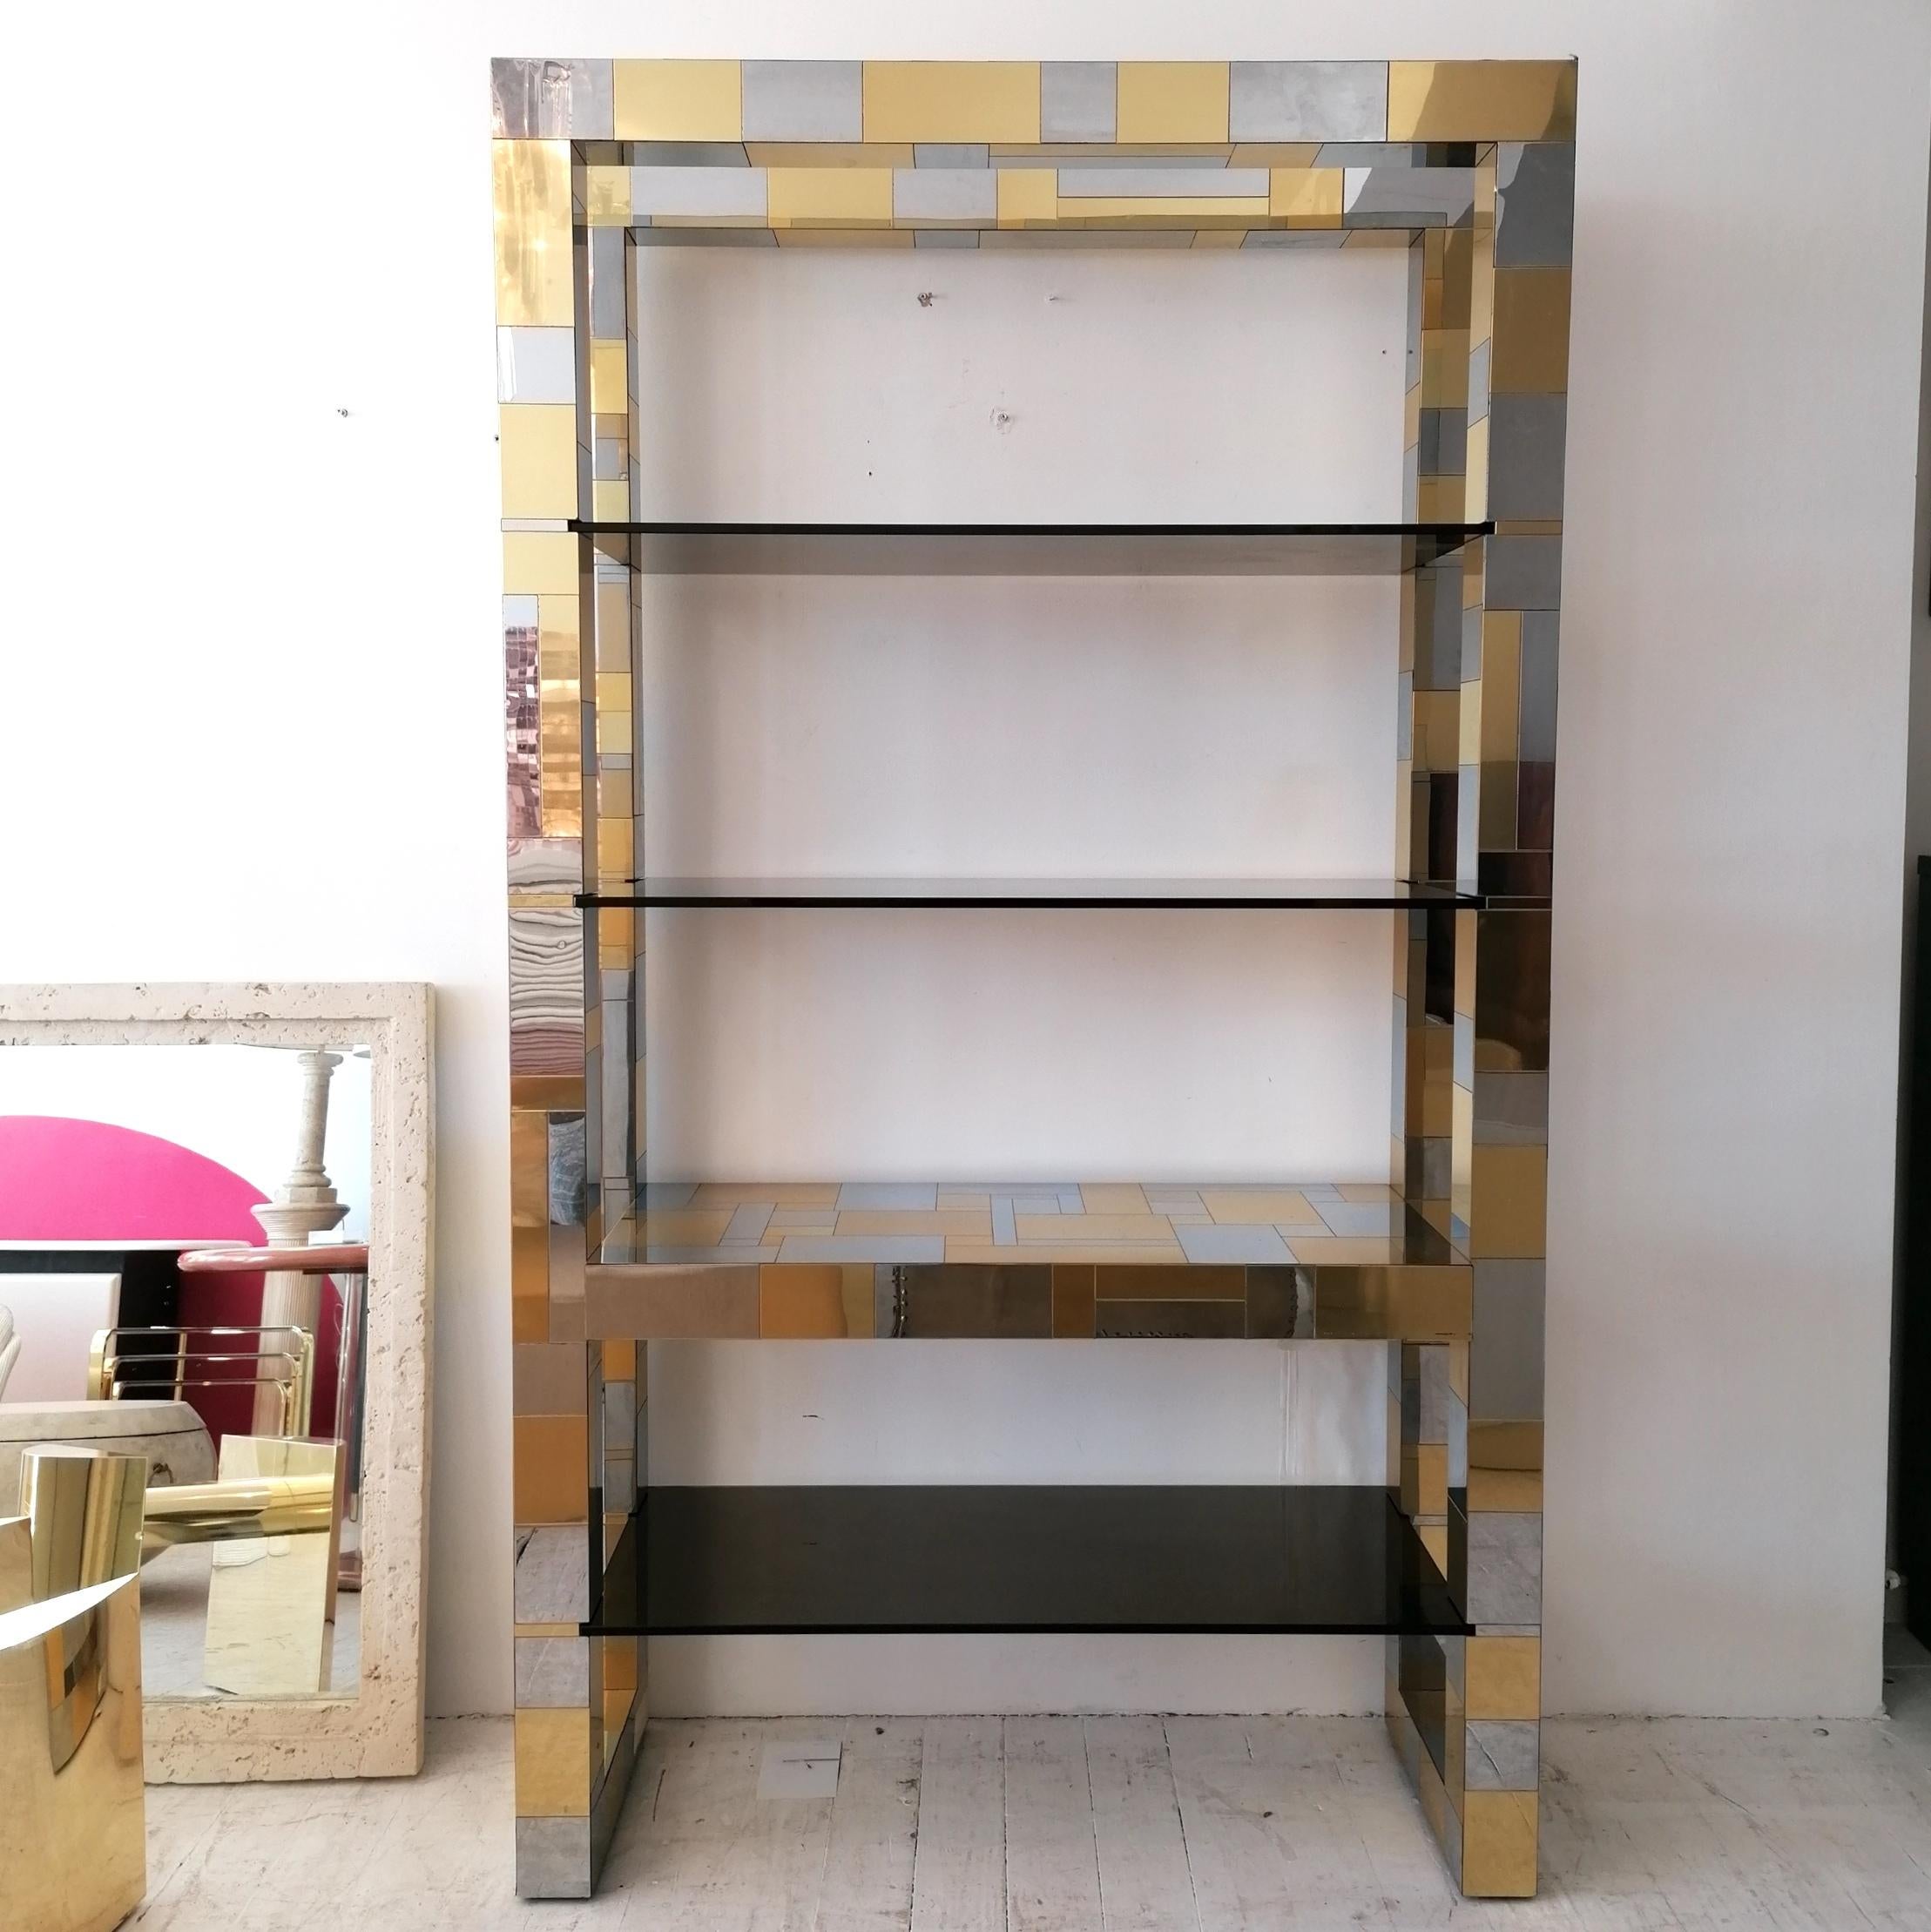  A rare signed iconic Paul Evans 'Cityscape' large freestanding etagere, USA 1970s. Chrome & brass clad patchwork design- even on the underside- with thick smoked glass slot-in shelves.
Light age-related wear...light scratches and scuffs. One shelf